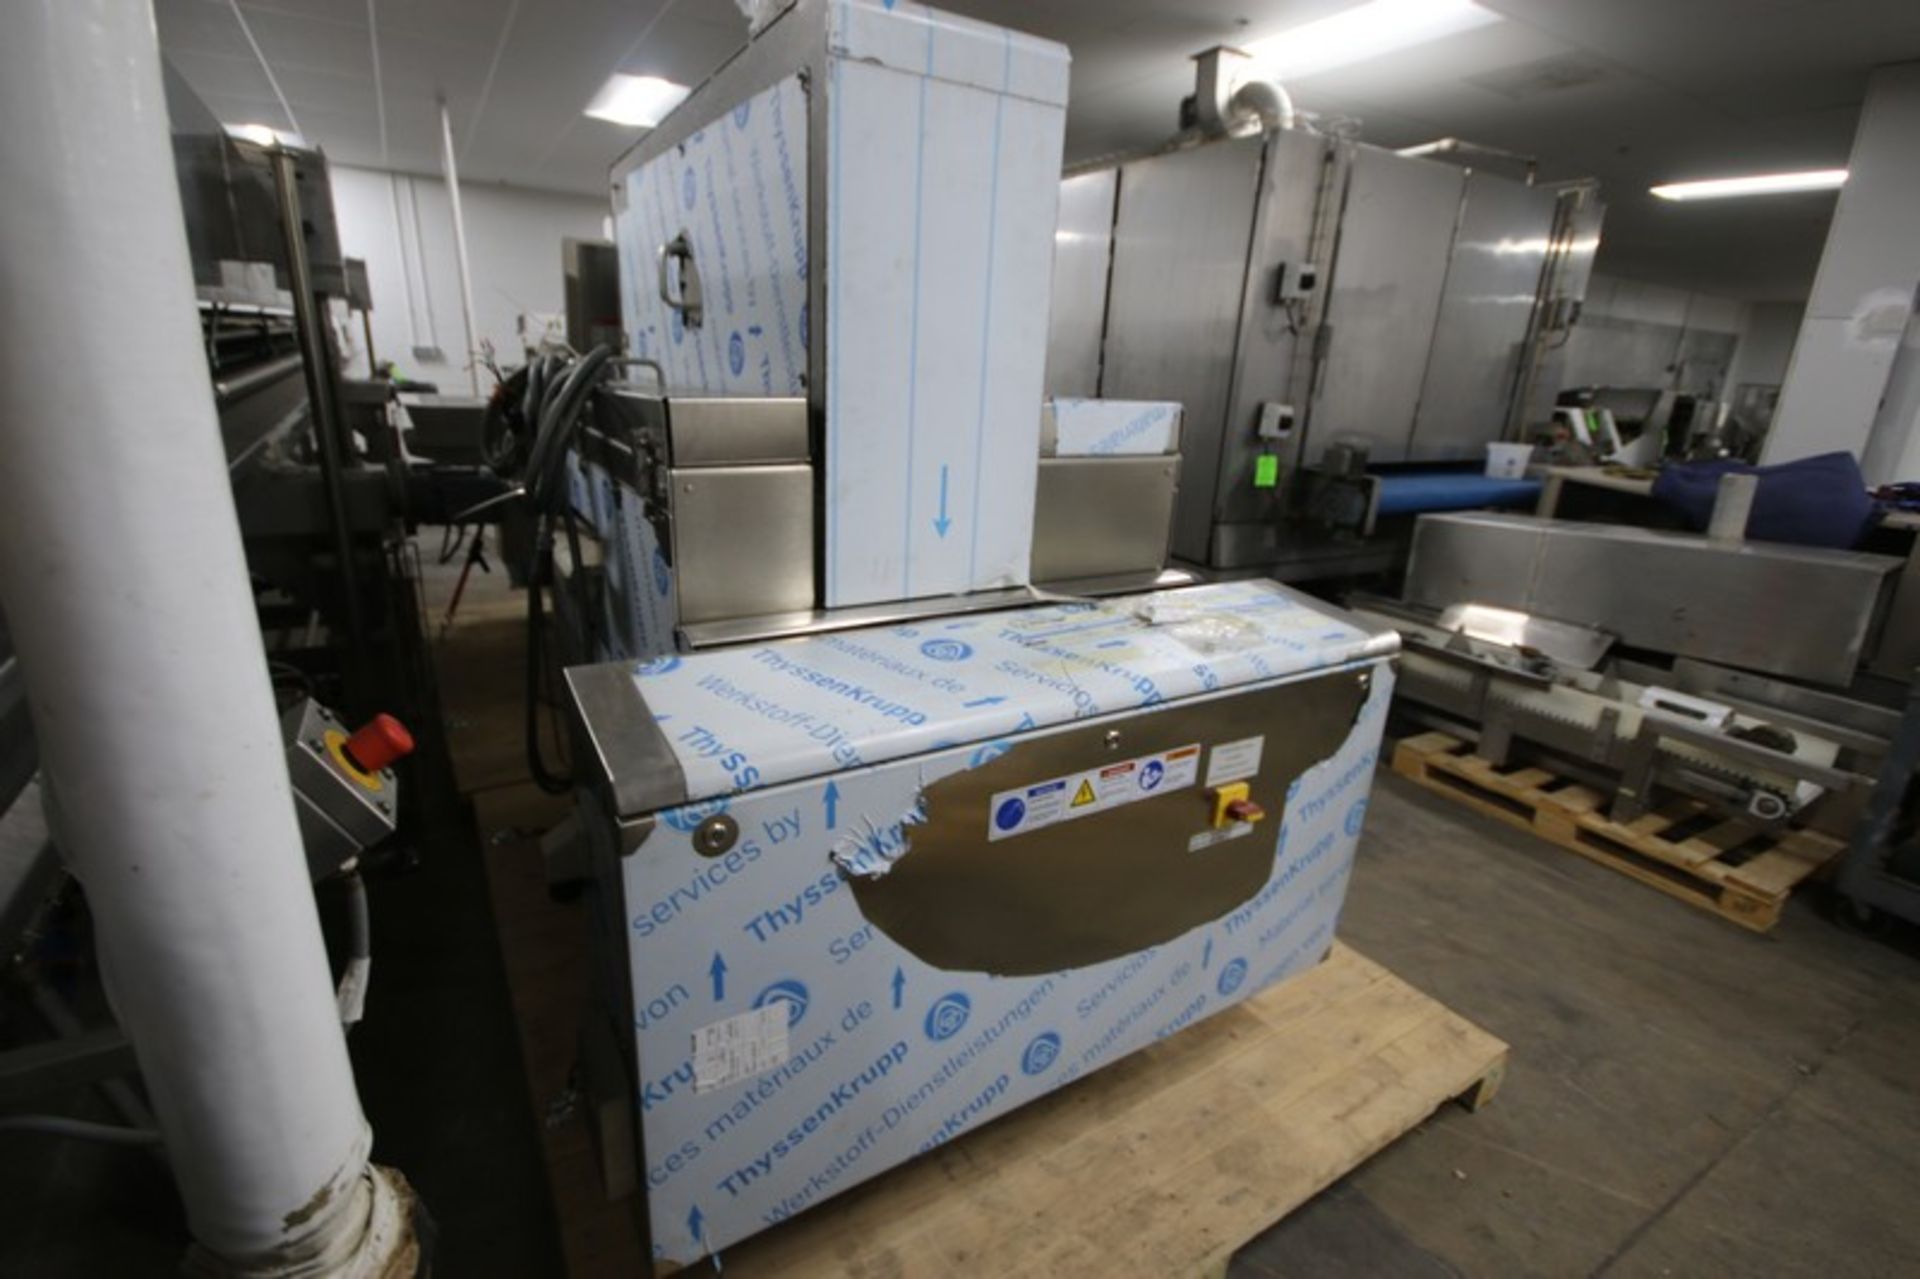 NEW 2012 MultiVac Vacuum Packager, Type: H050, S/N 158612, 208/120 Volts (LOCATED IN BELTSVILLE, MD) - Image 5 of 14